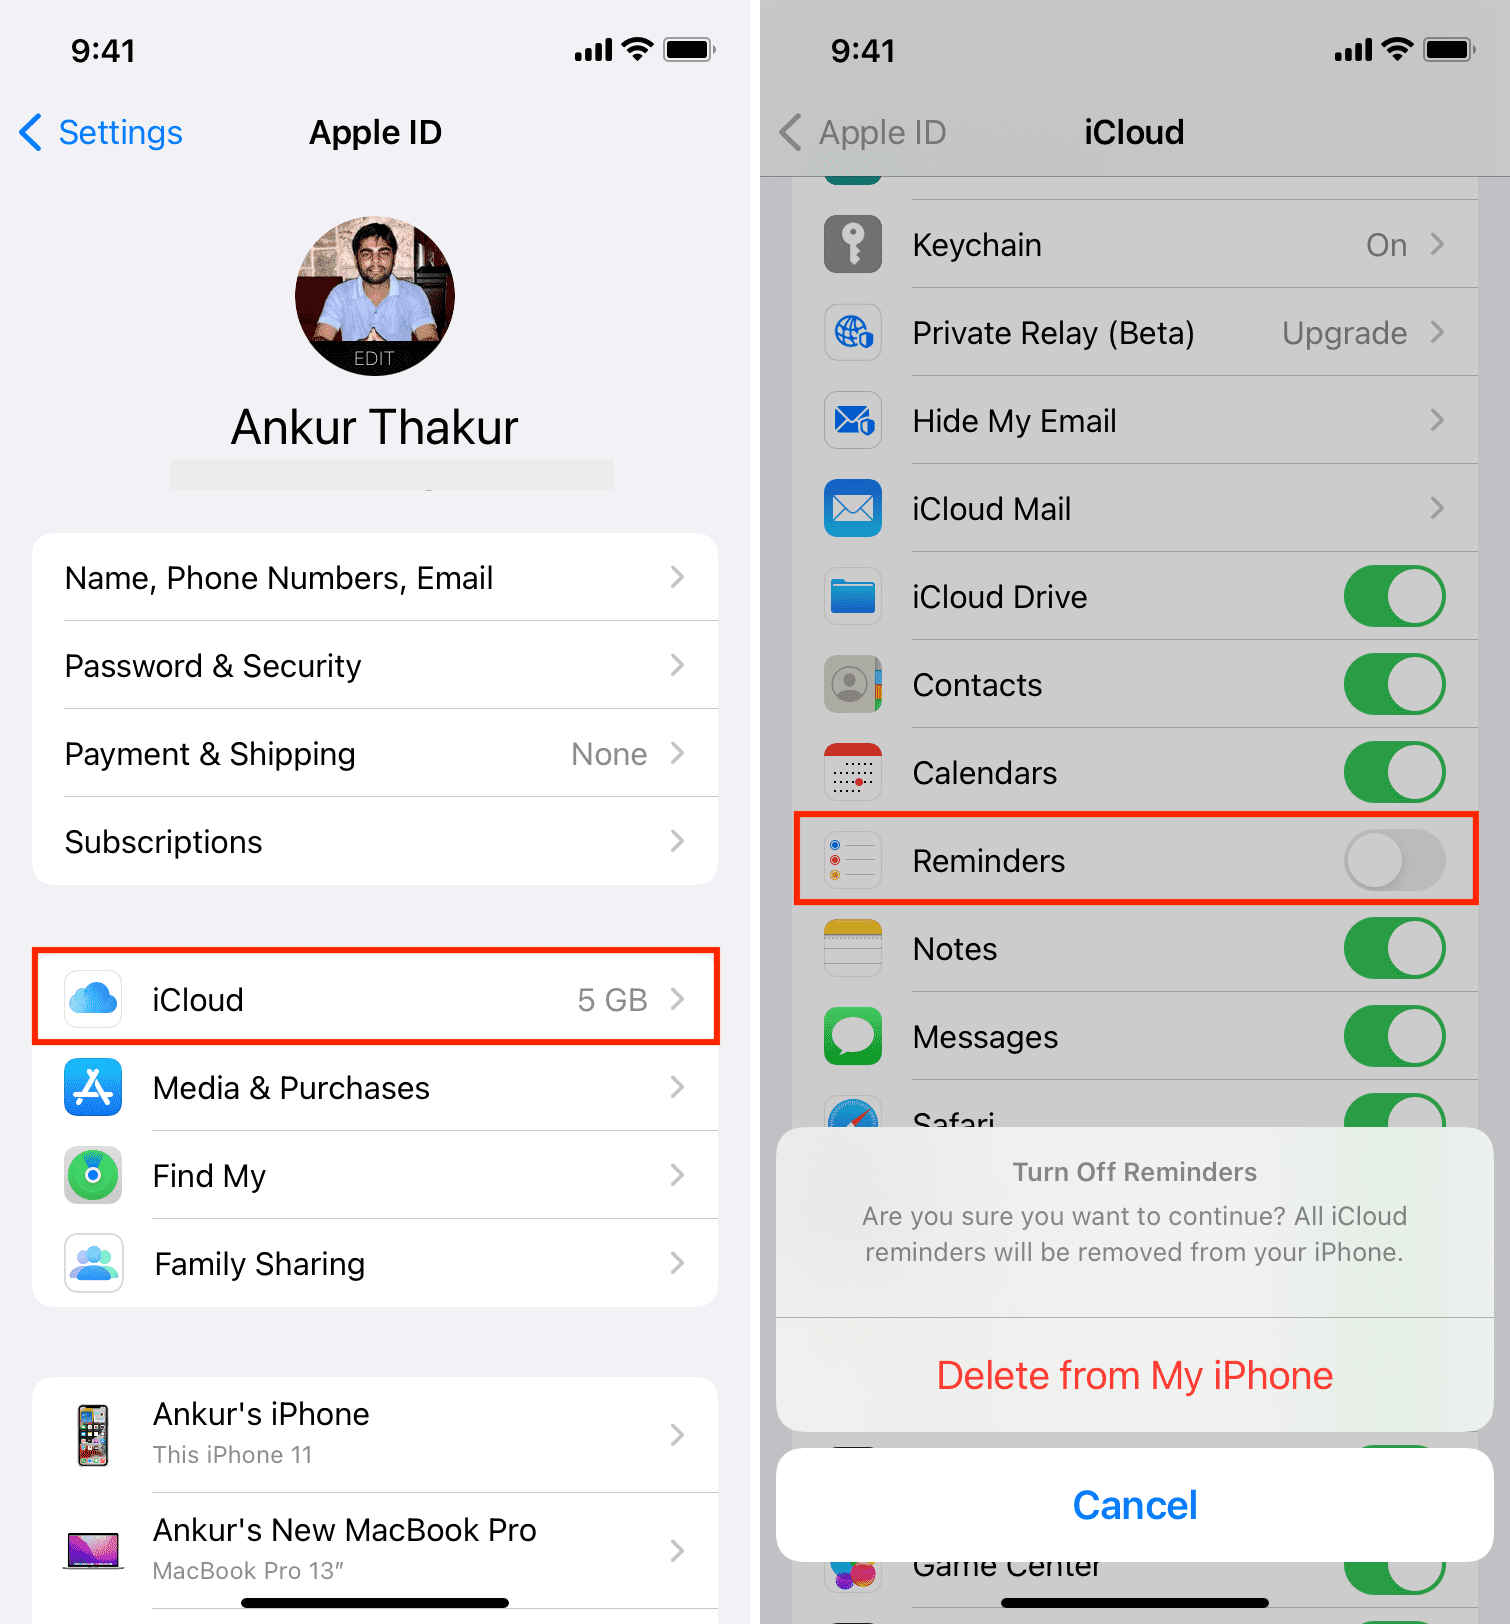 Delete reminders from iPhone and re-sync